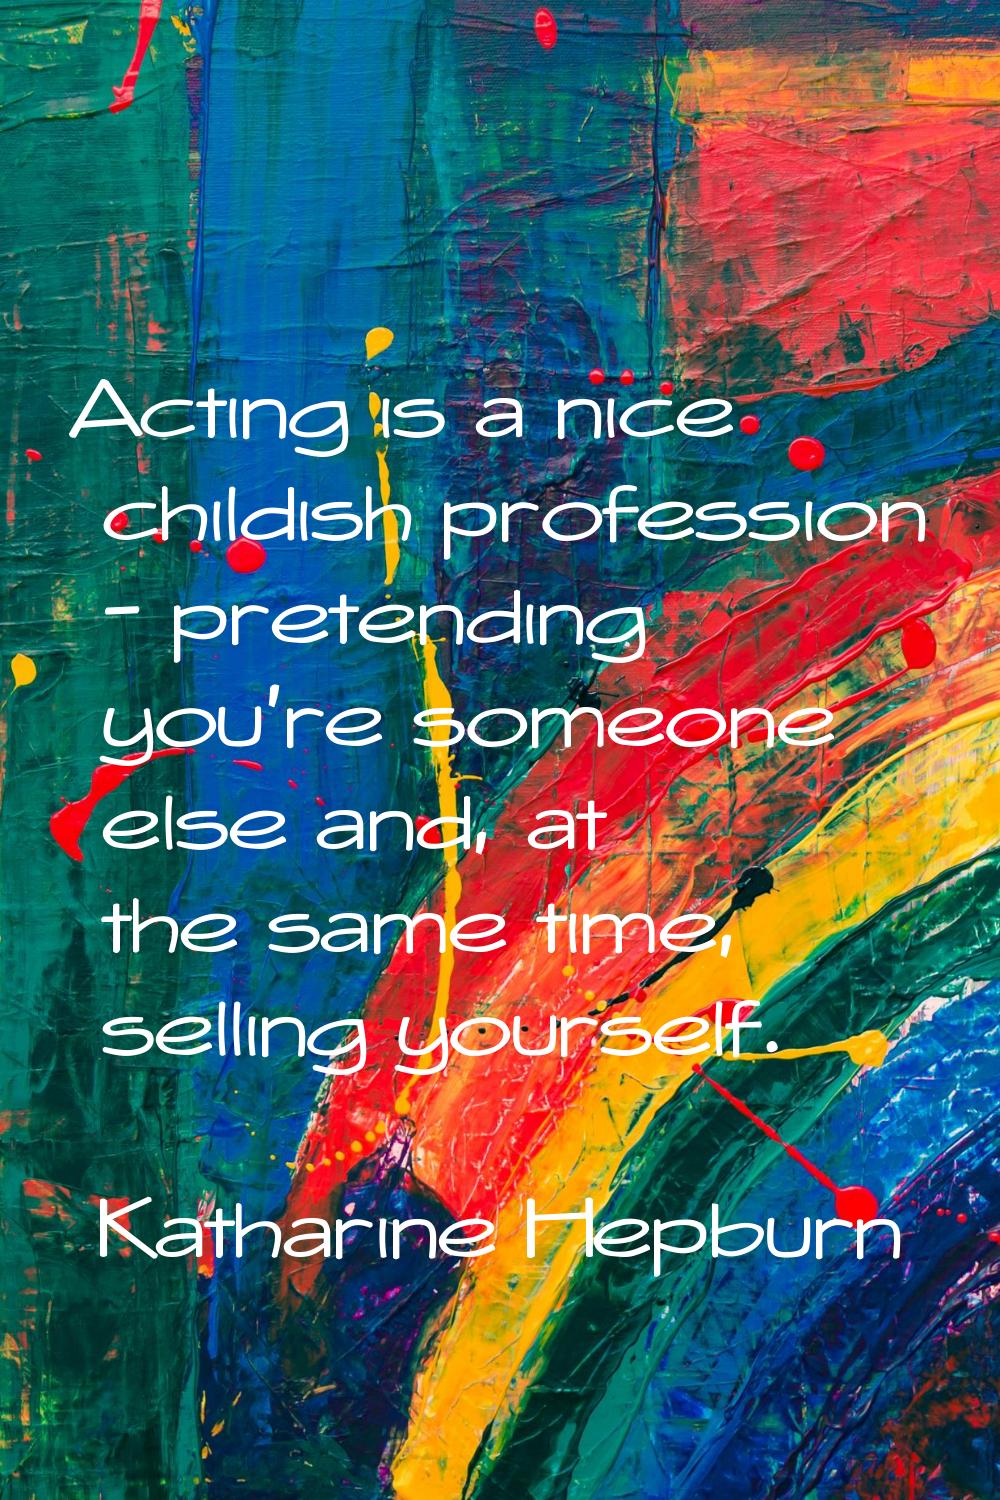 Acting is a nice childish profession - pretending you're someone else and, at the same time, sellin